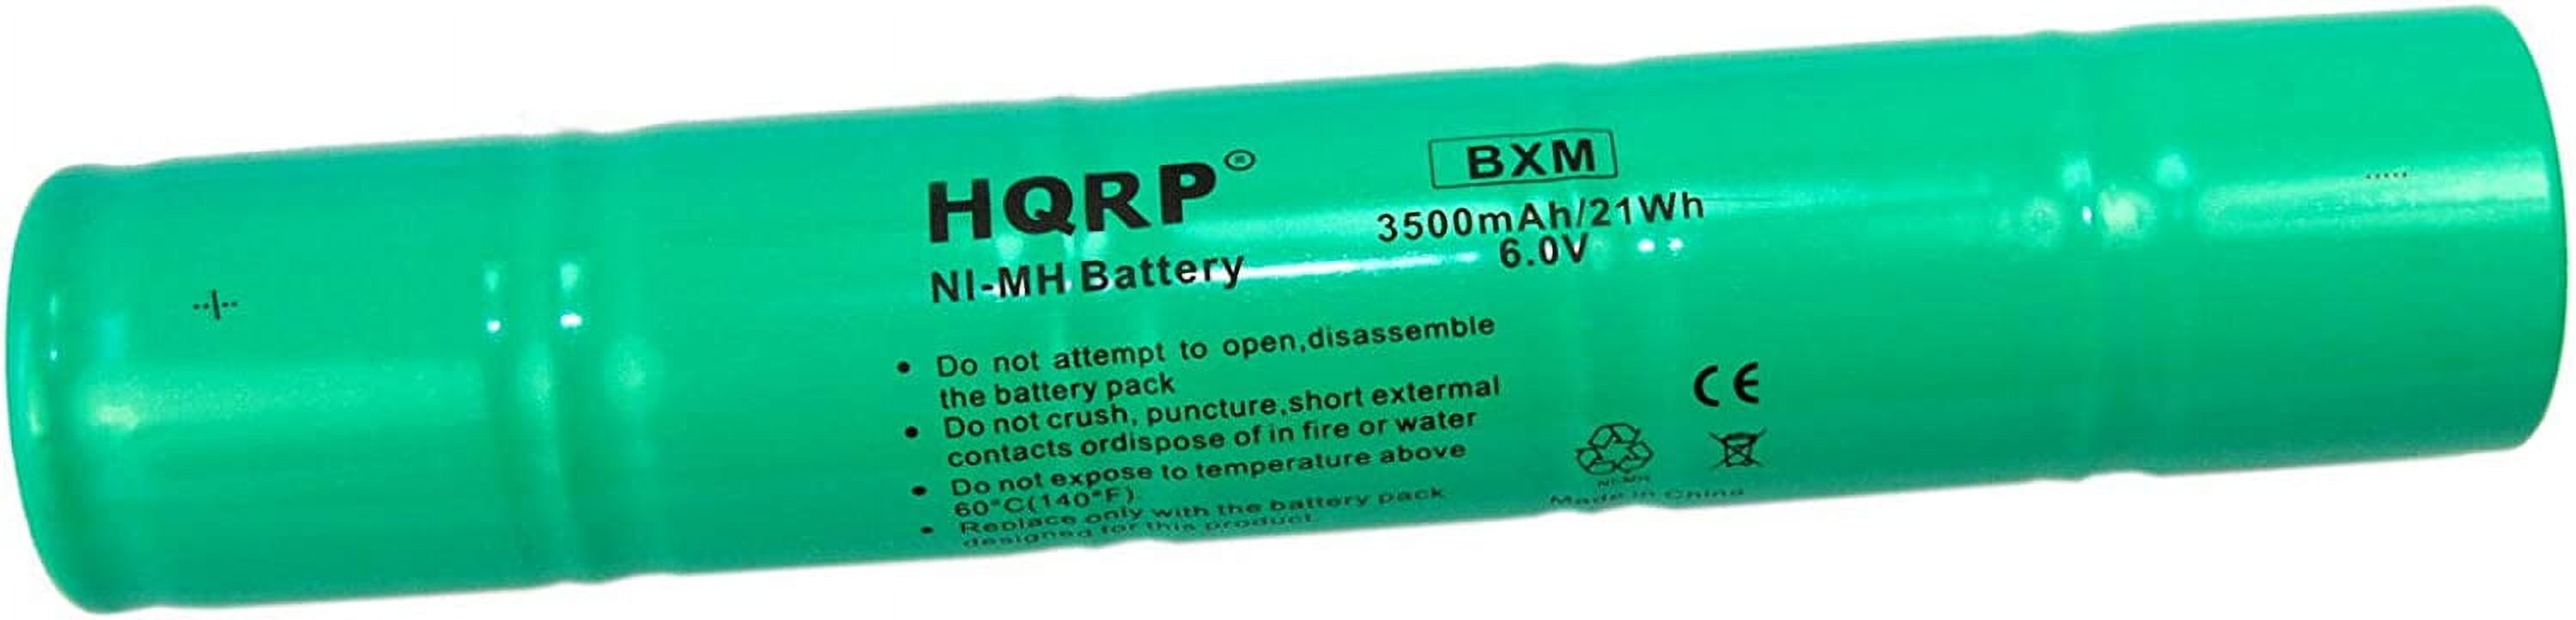 HQRP Ultra High Capacity Ni-Mh 1/2D Battery for Moltech Power Systems N38AF001A / Intec IMT-3500D / ESR8EE5920 - image 4 of 6